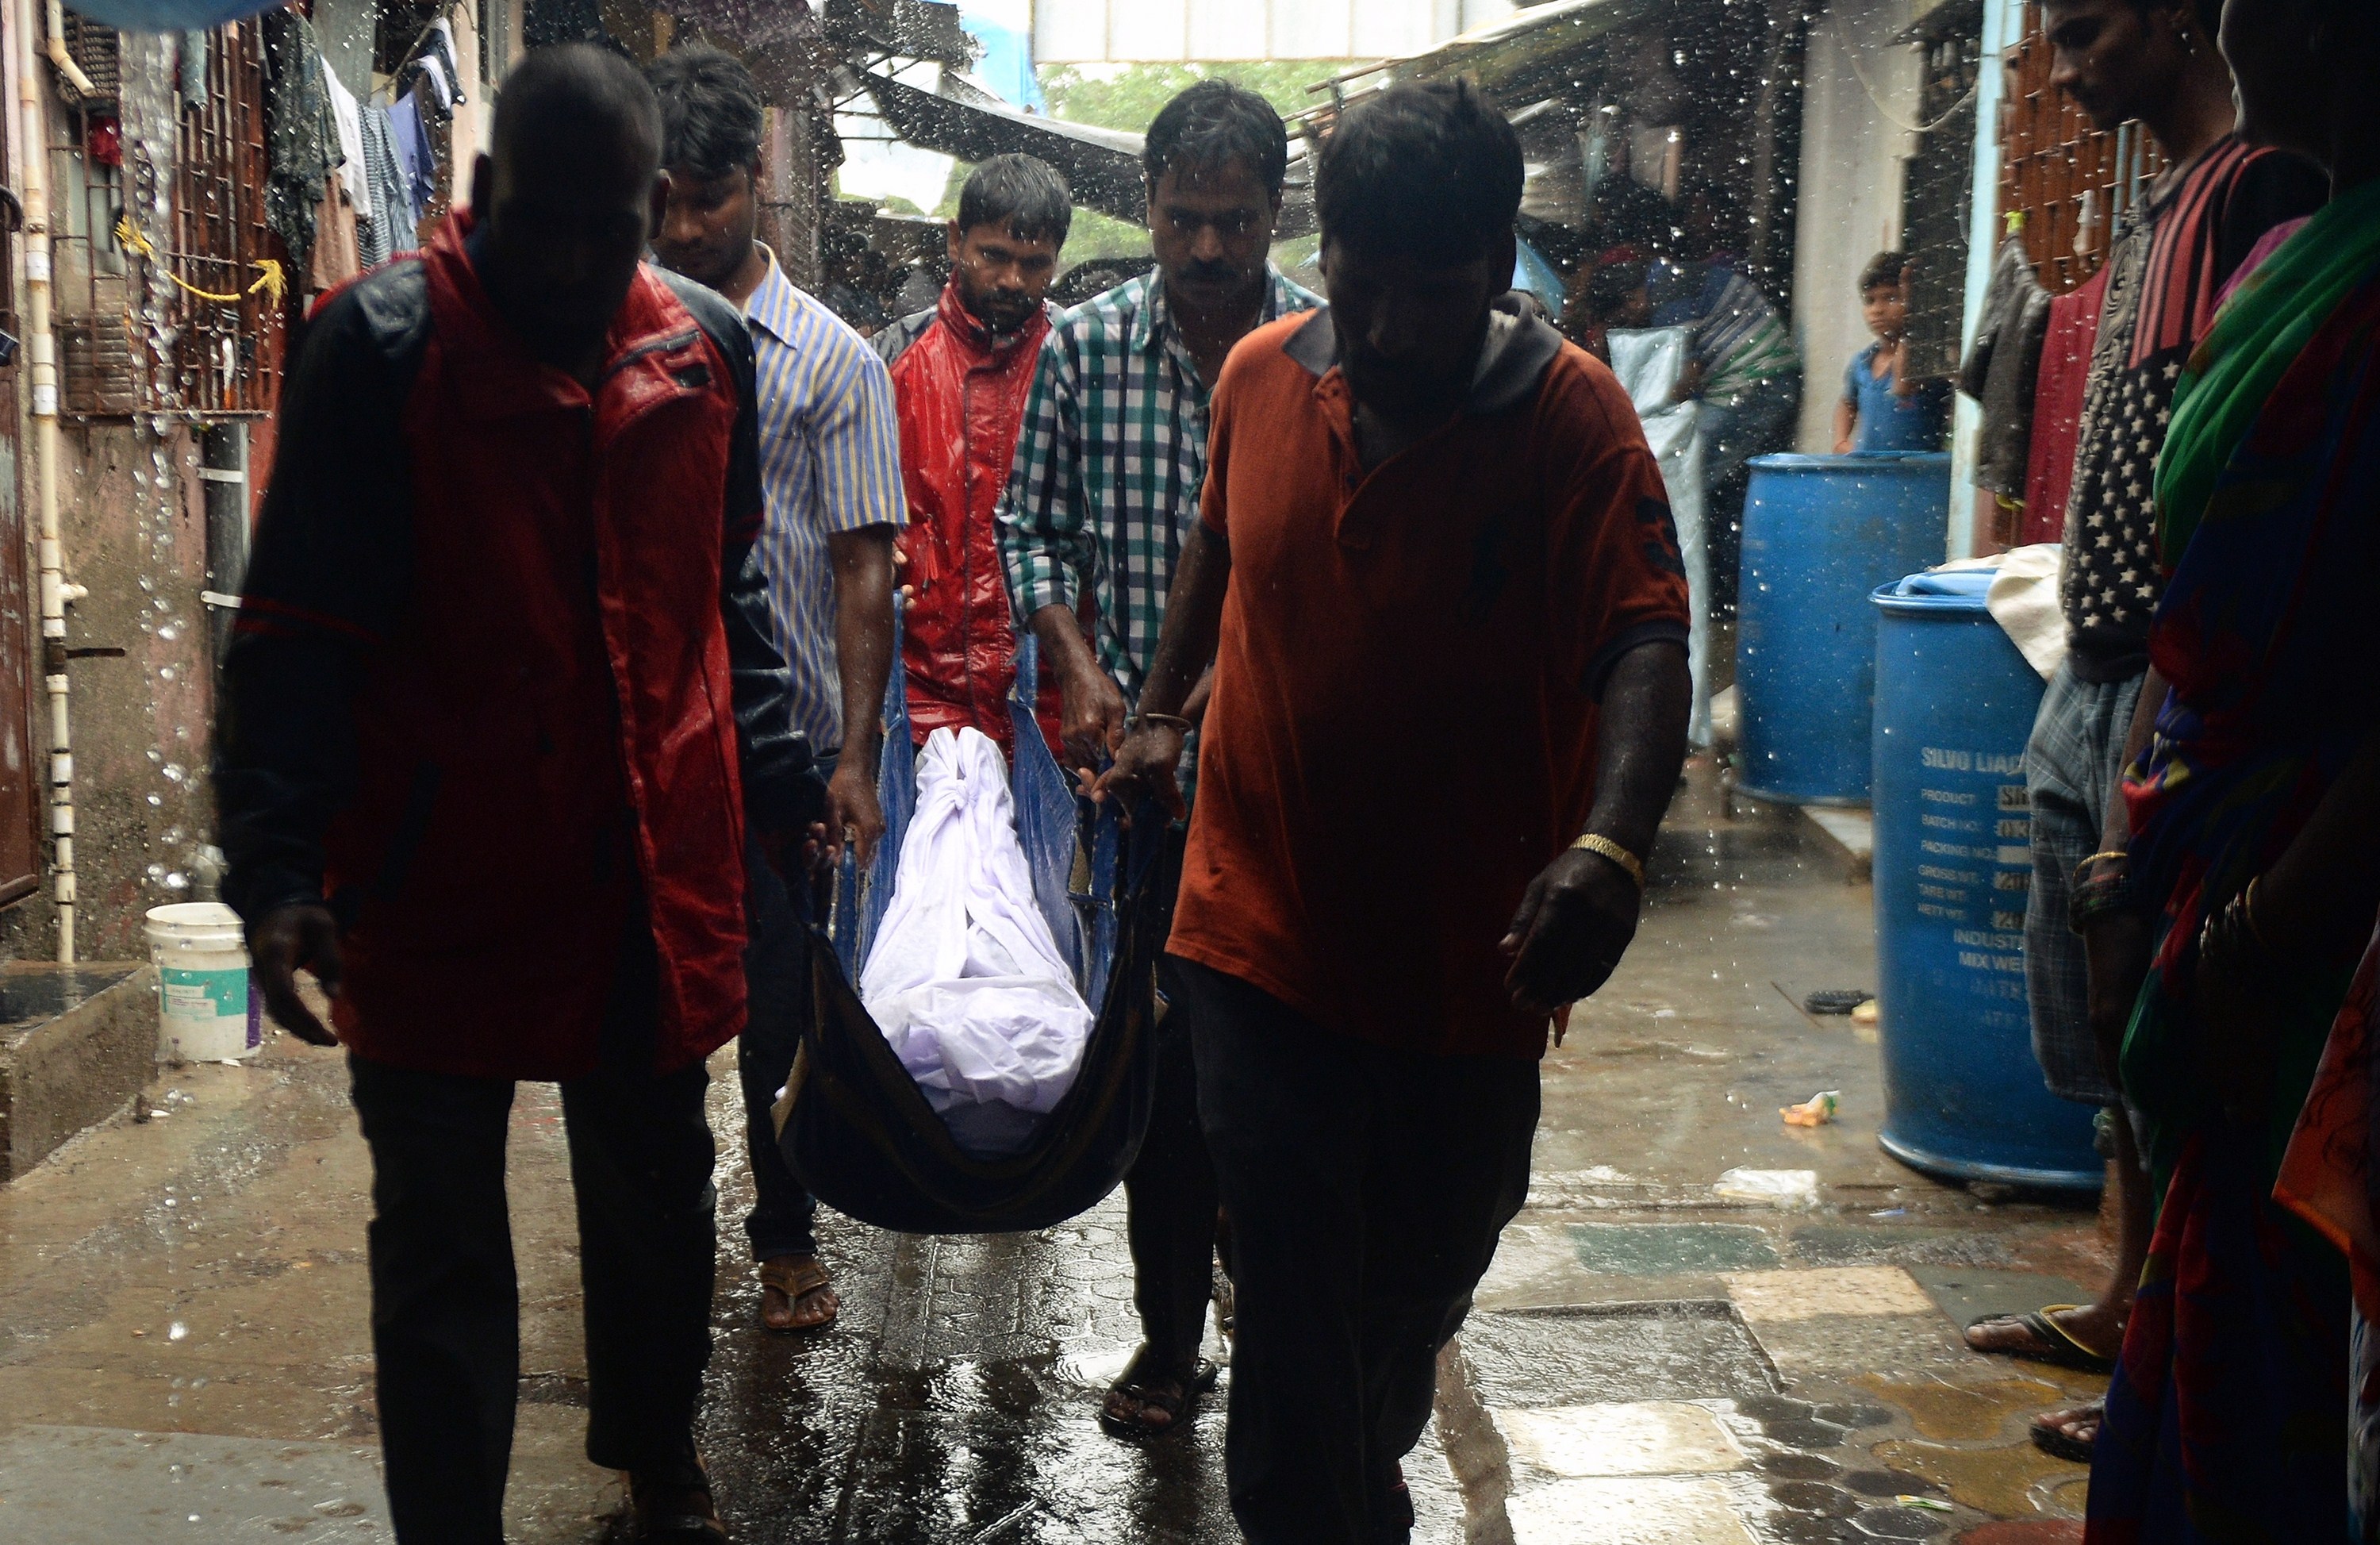 Family members carry the body of a victim of toxic homemade liquor consumption in Mumbai on June 20, 2015 (Punit Paranjpe—AFP/Getty Images)